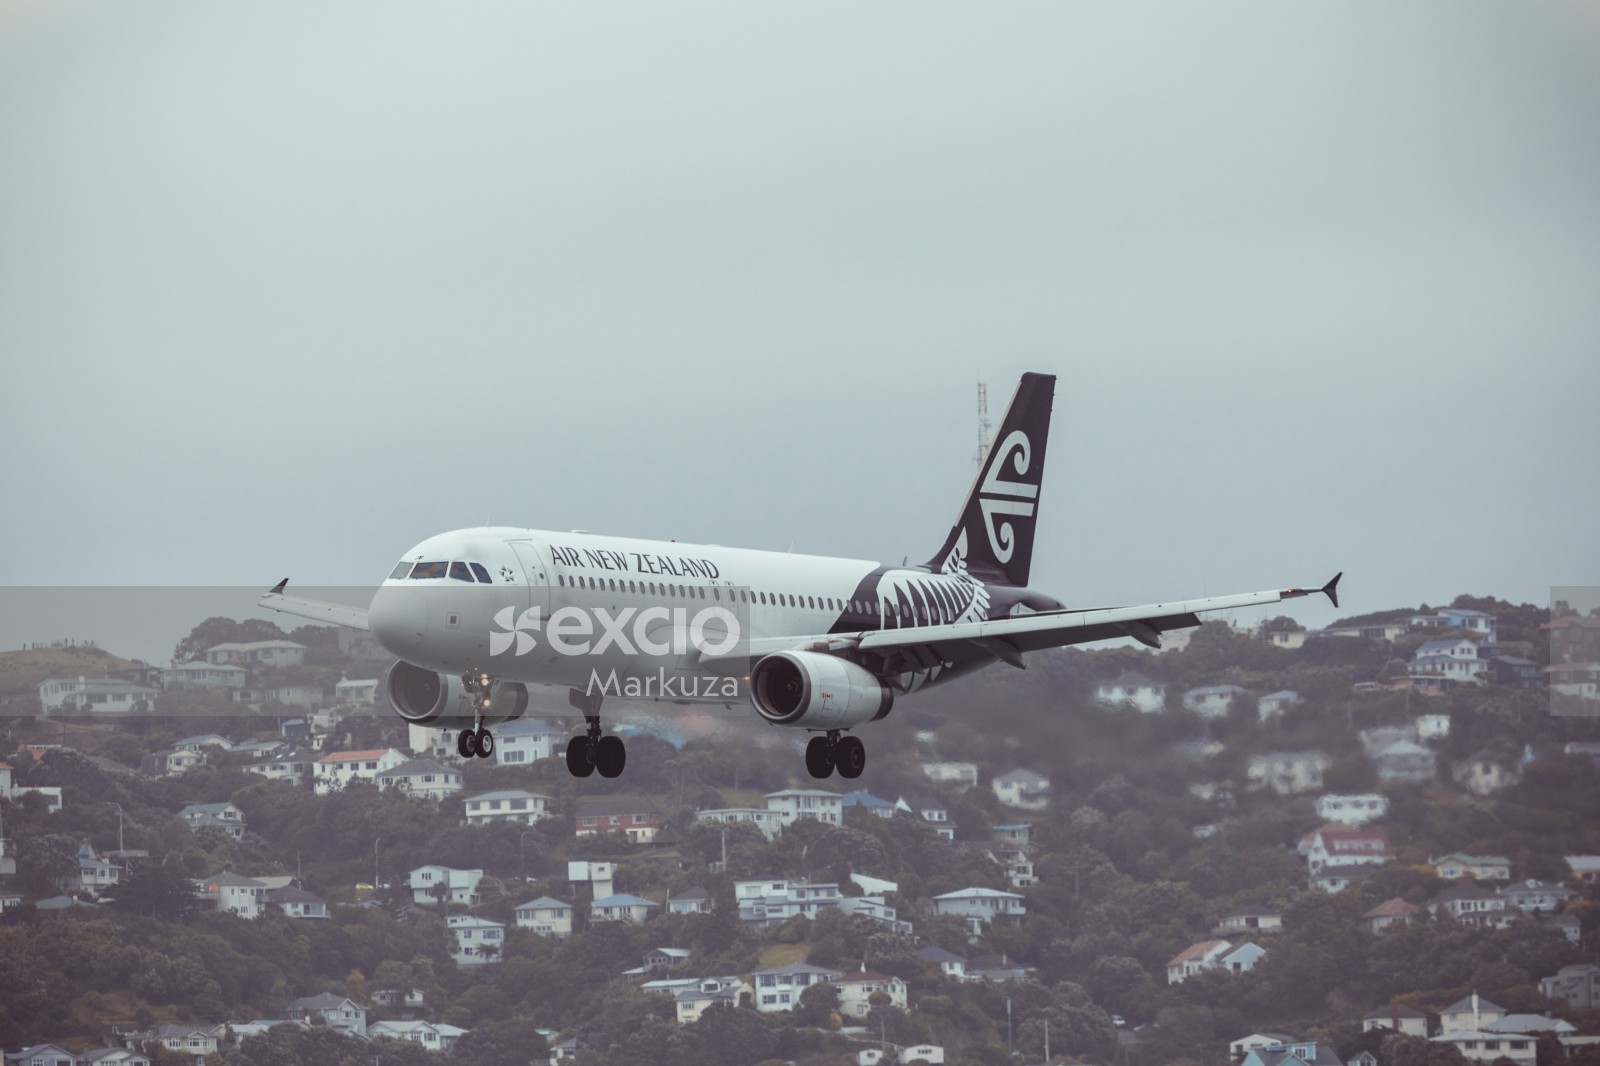 AIR NZ airplane over the sky of the city